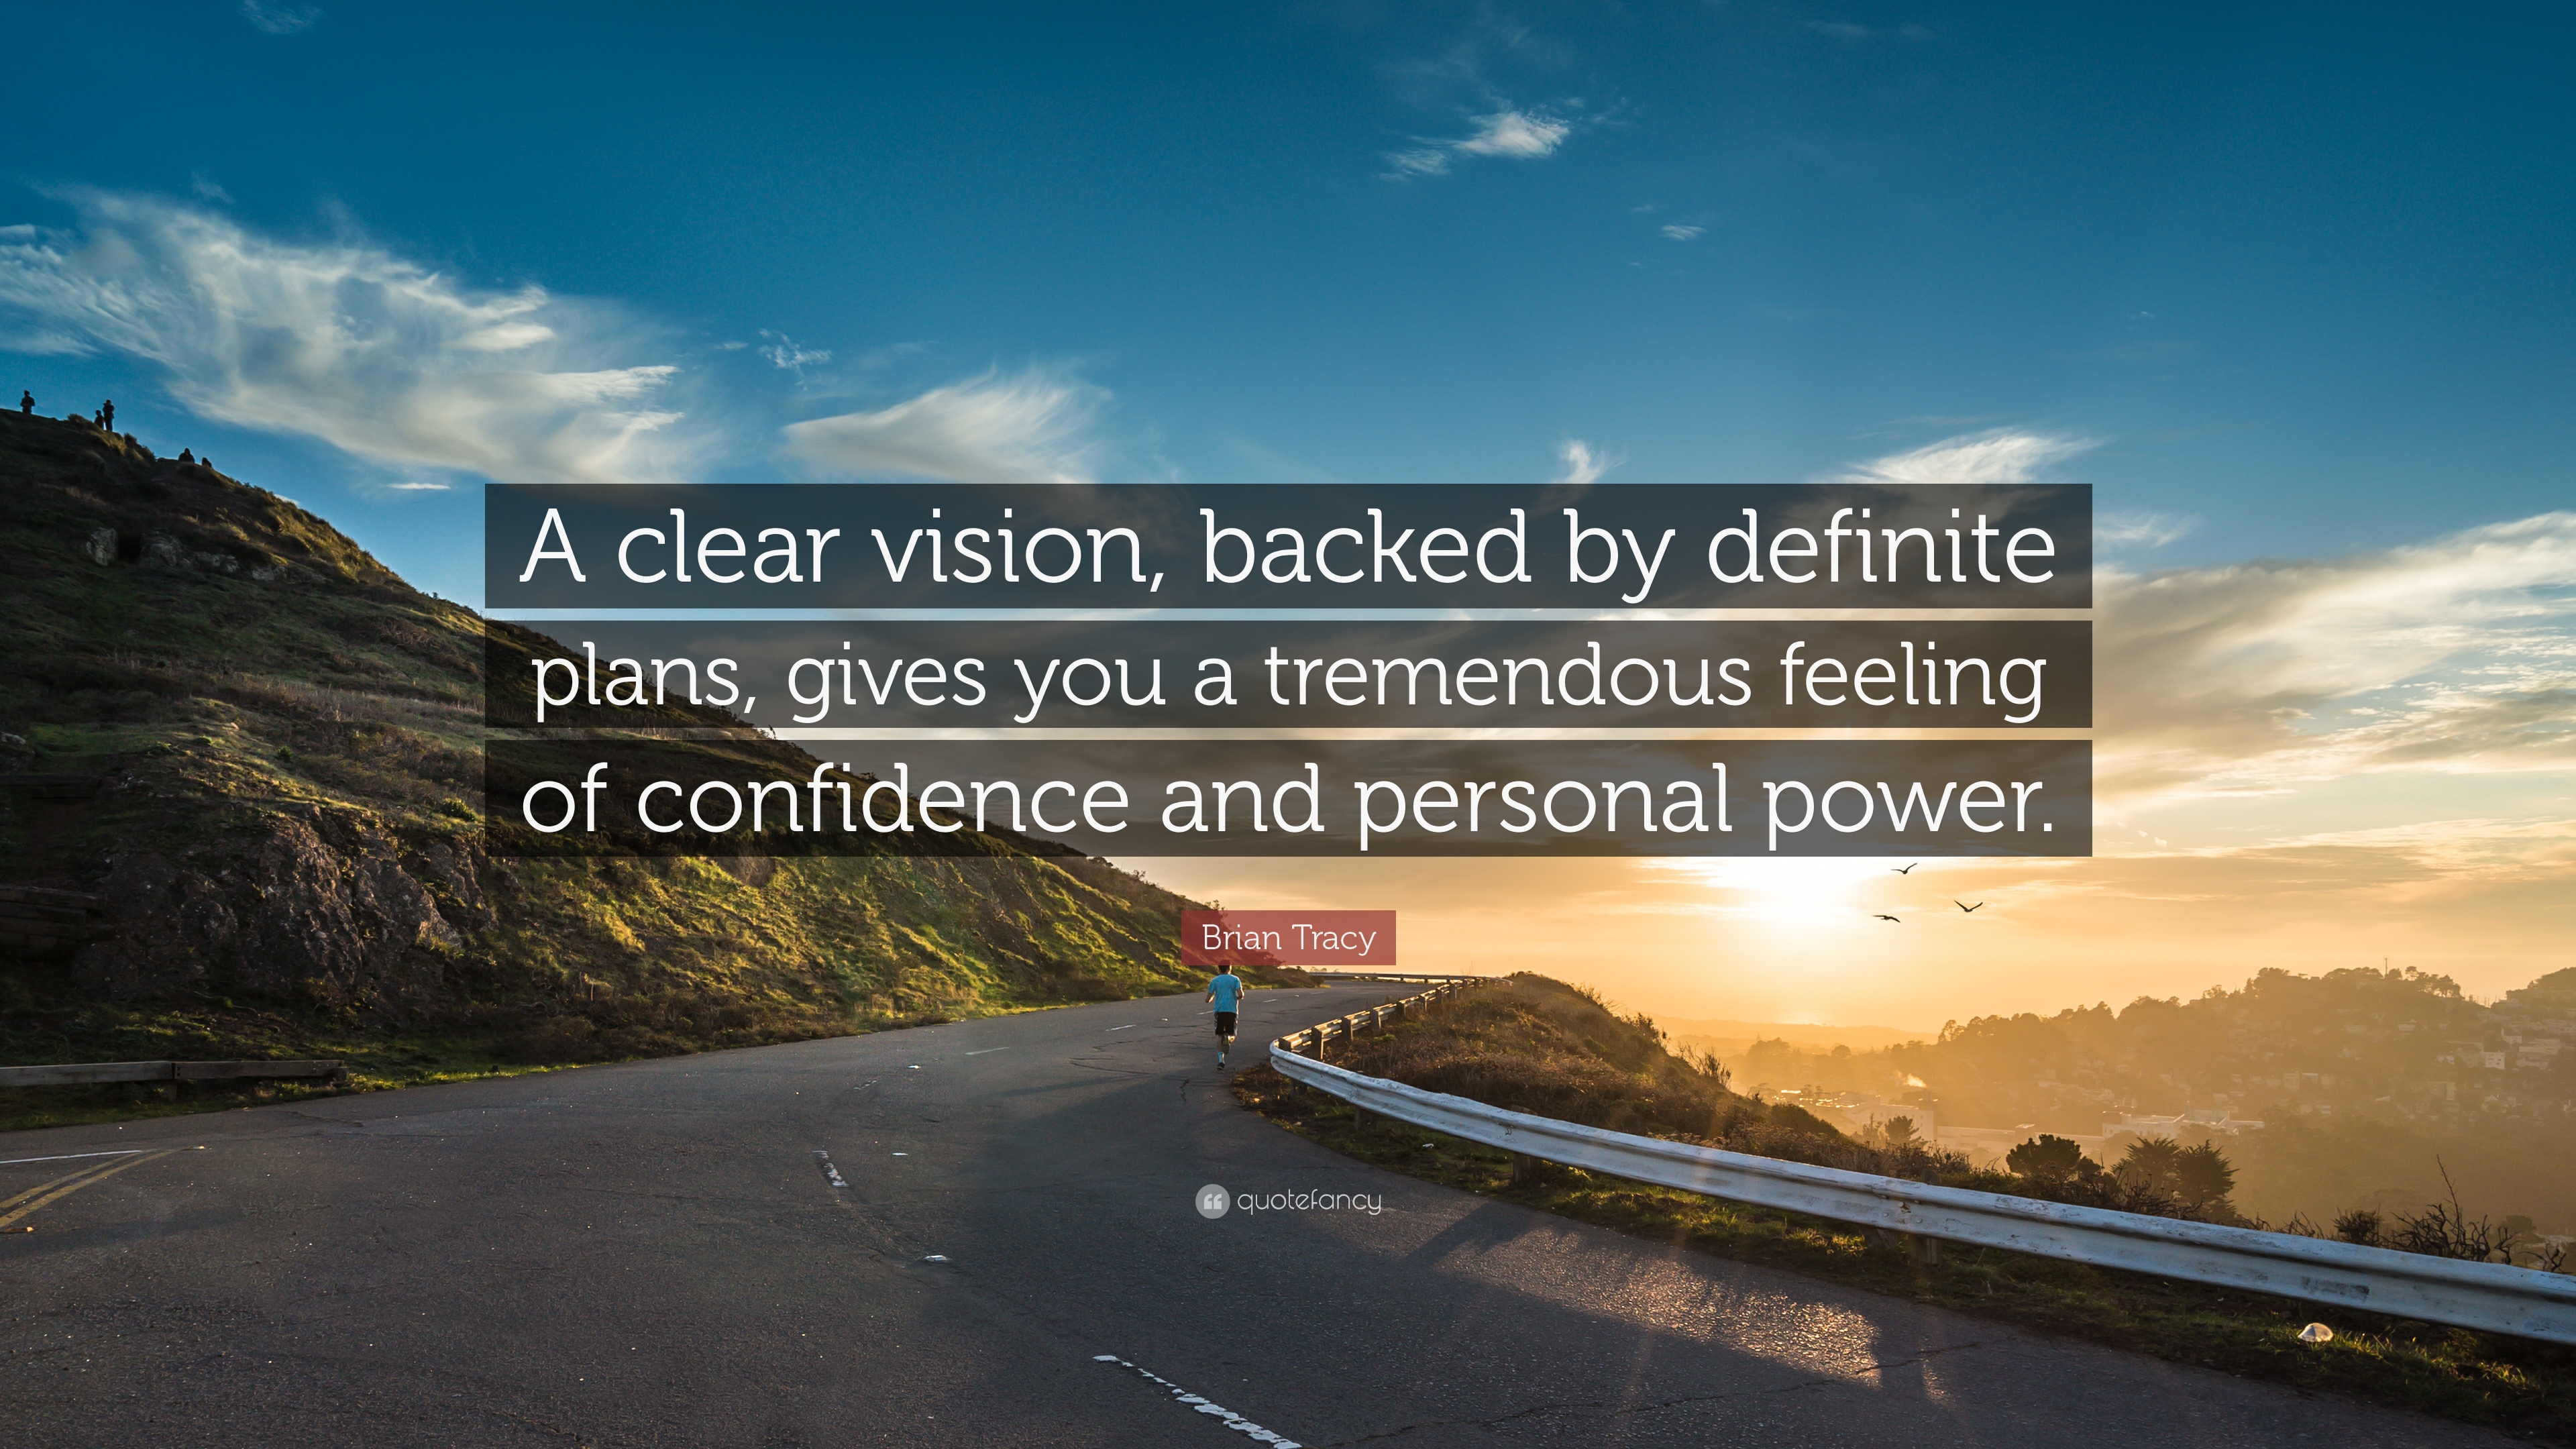 Brian Tracy Quote: “A clear vision, backed by definite plans, gives ...